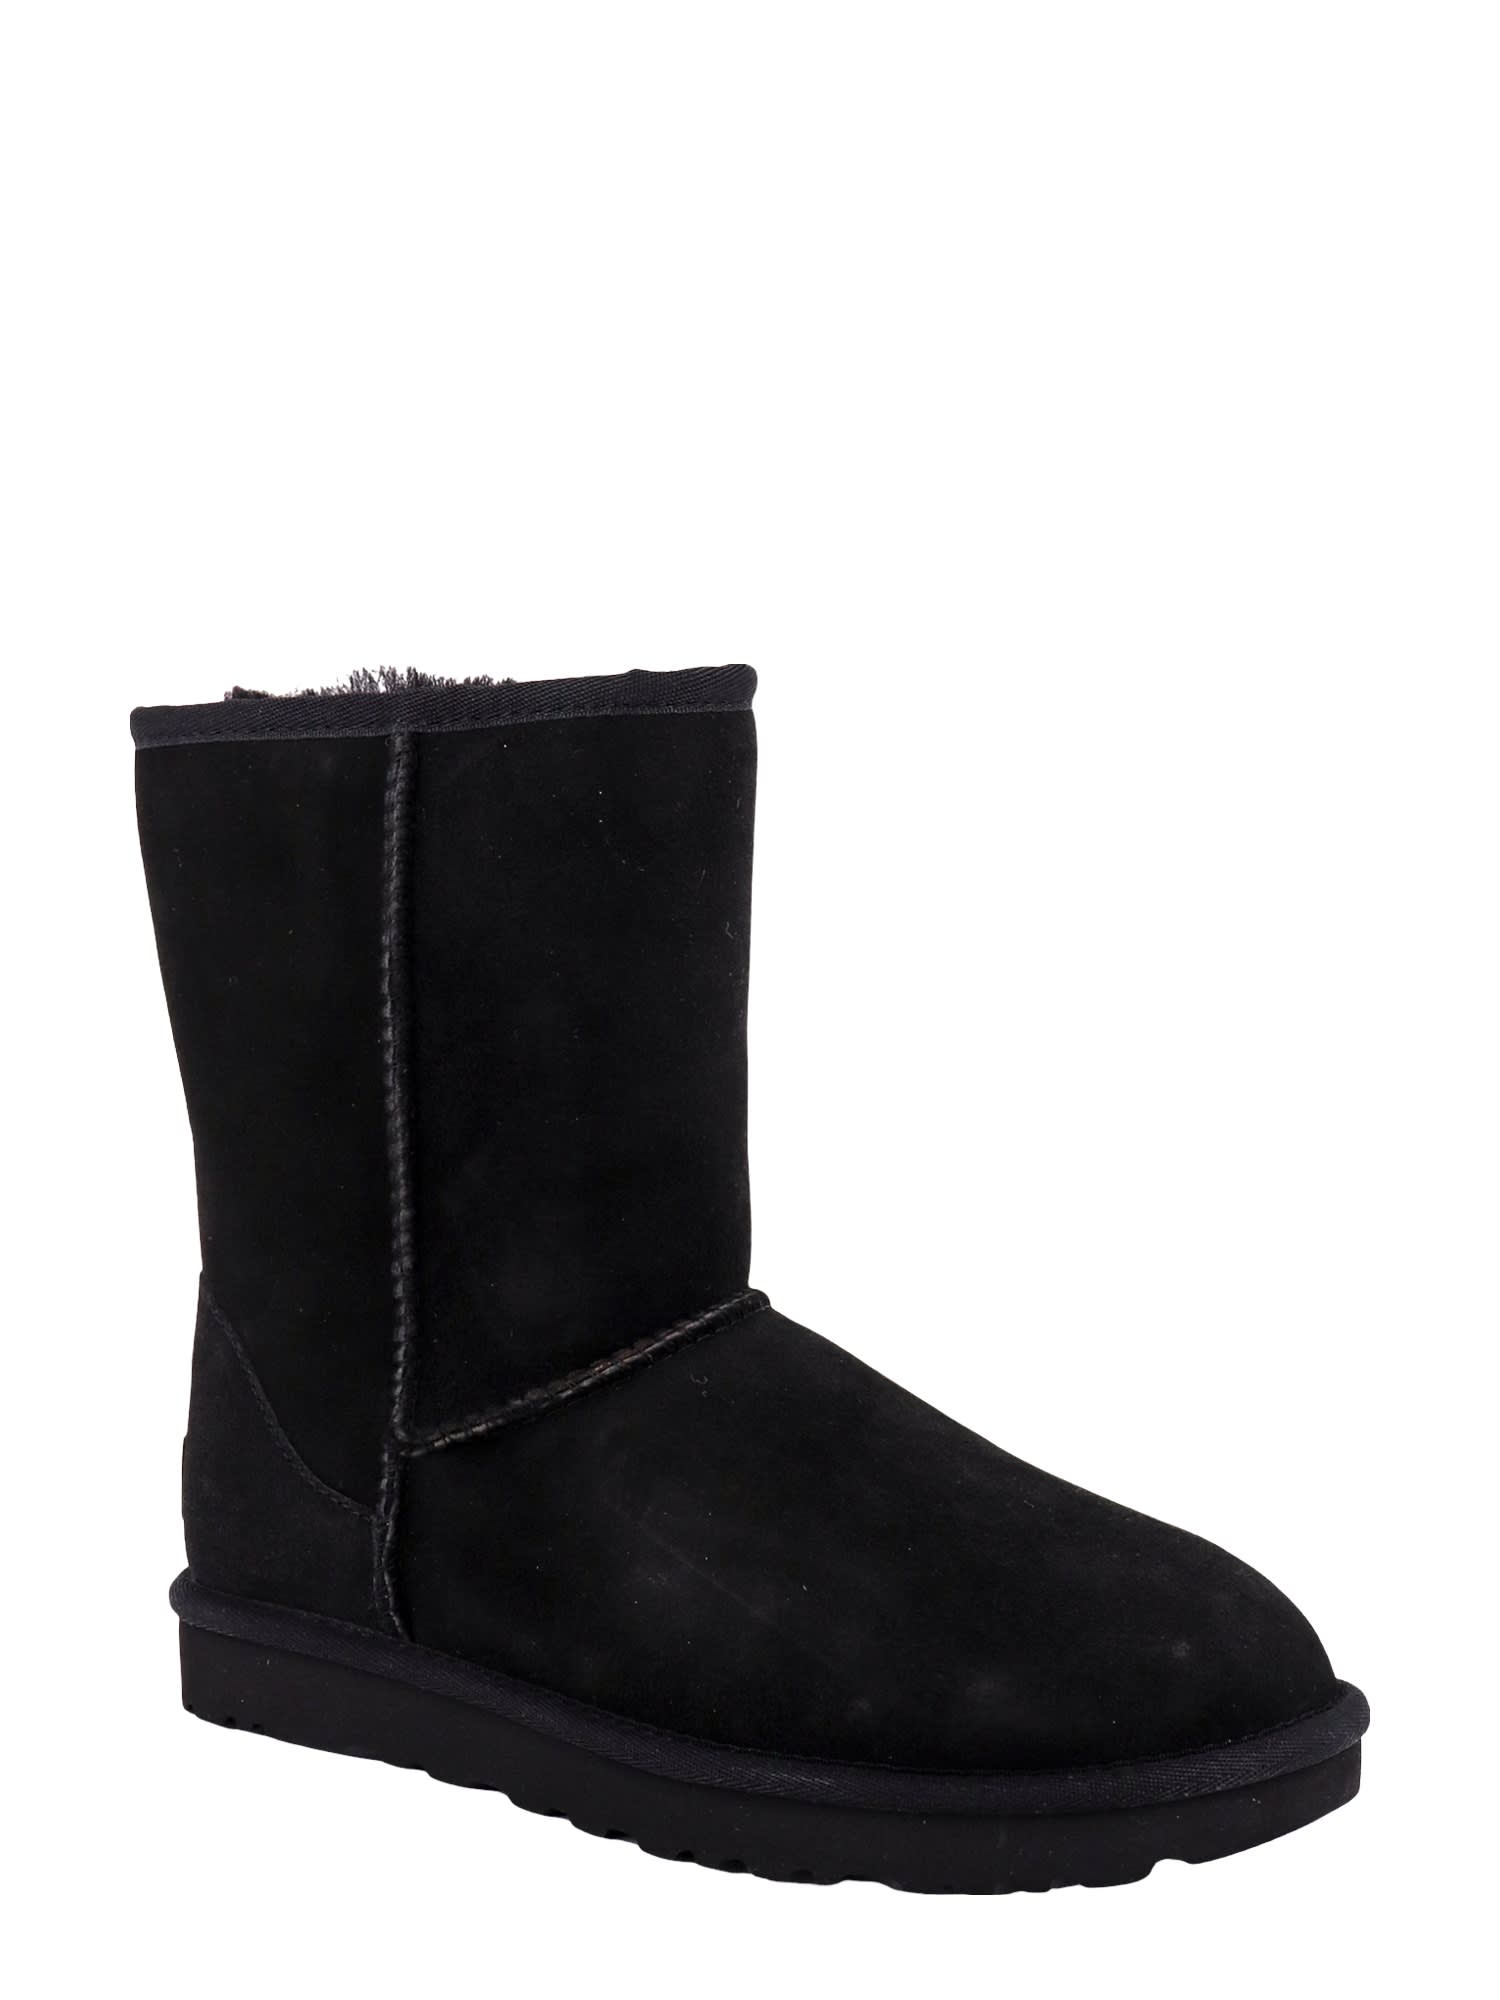 Shop Ugg Classic Short Ankle Boots In Black